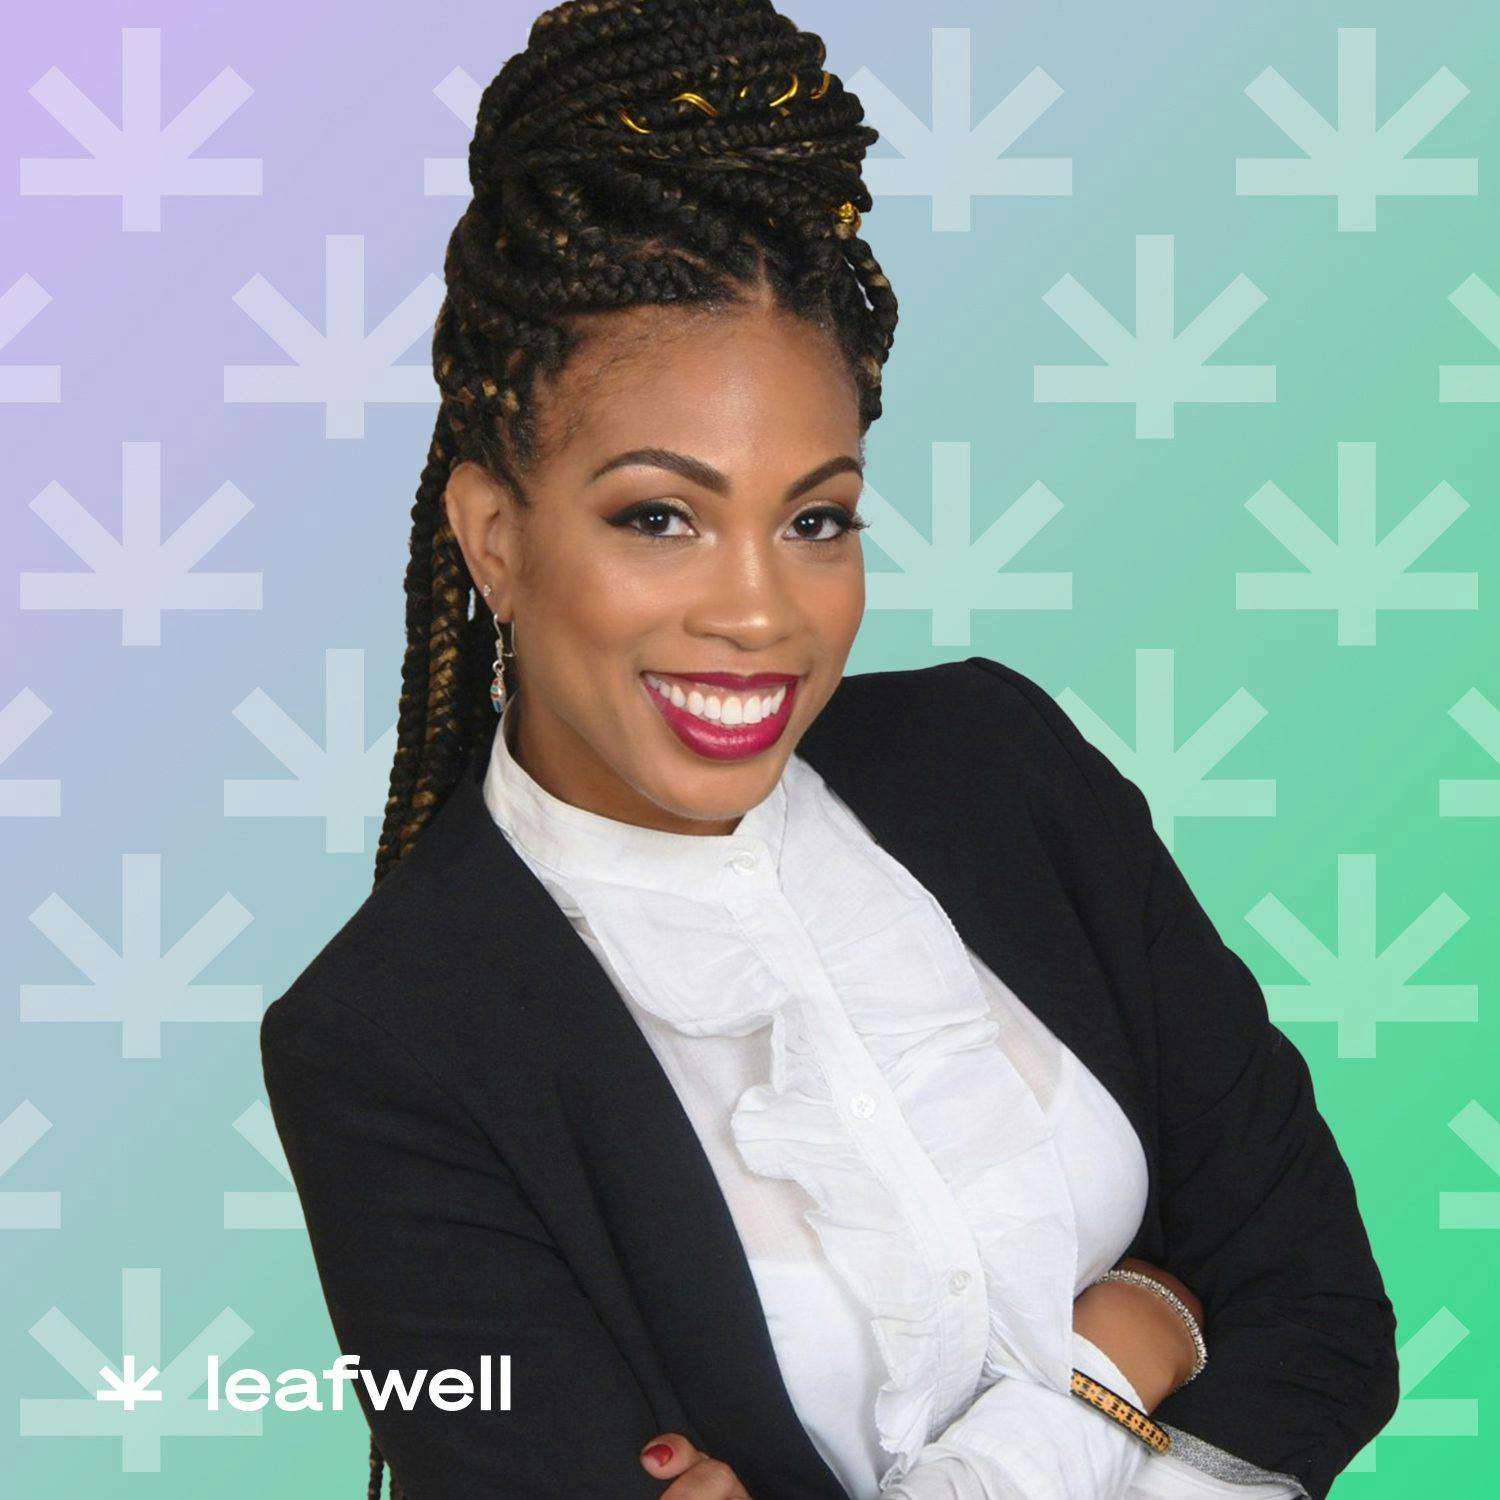 Dr. Ayana Jordan in a gradient Leafwell's baclground